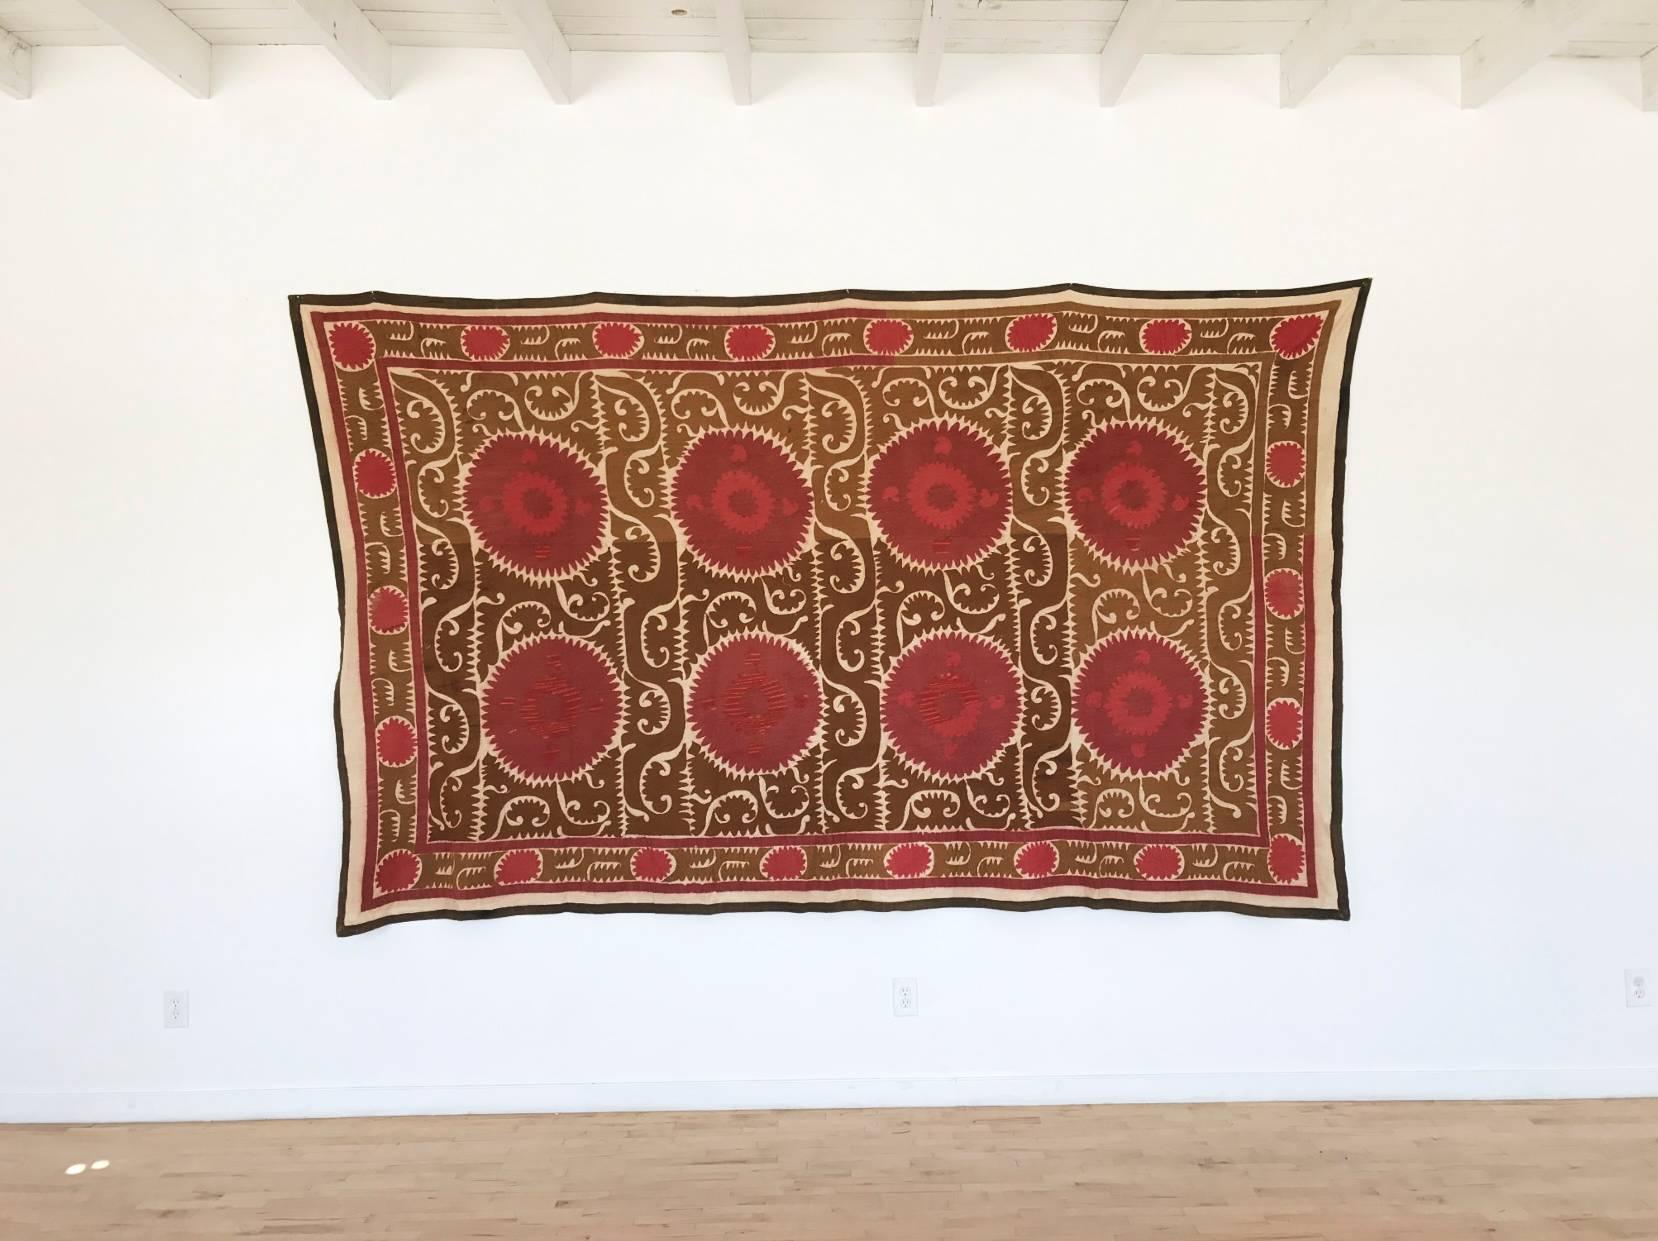 Intricate hand-embroidered needlework Uzbek Suzani on cream background with beige, red and pink geometric and paisley motifs throughout. Beige border. Linen and cotton with silk threading. Very large size - can act as a bold wall hanging, bedspread